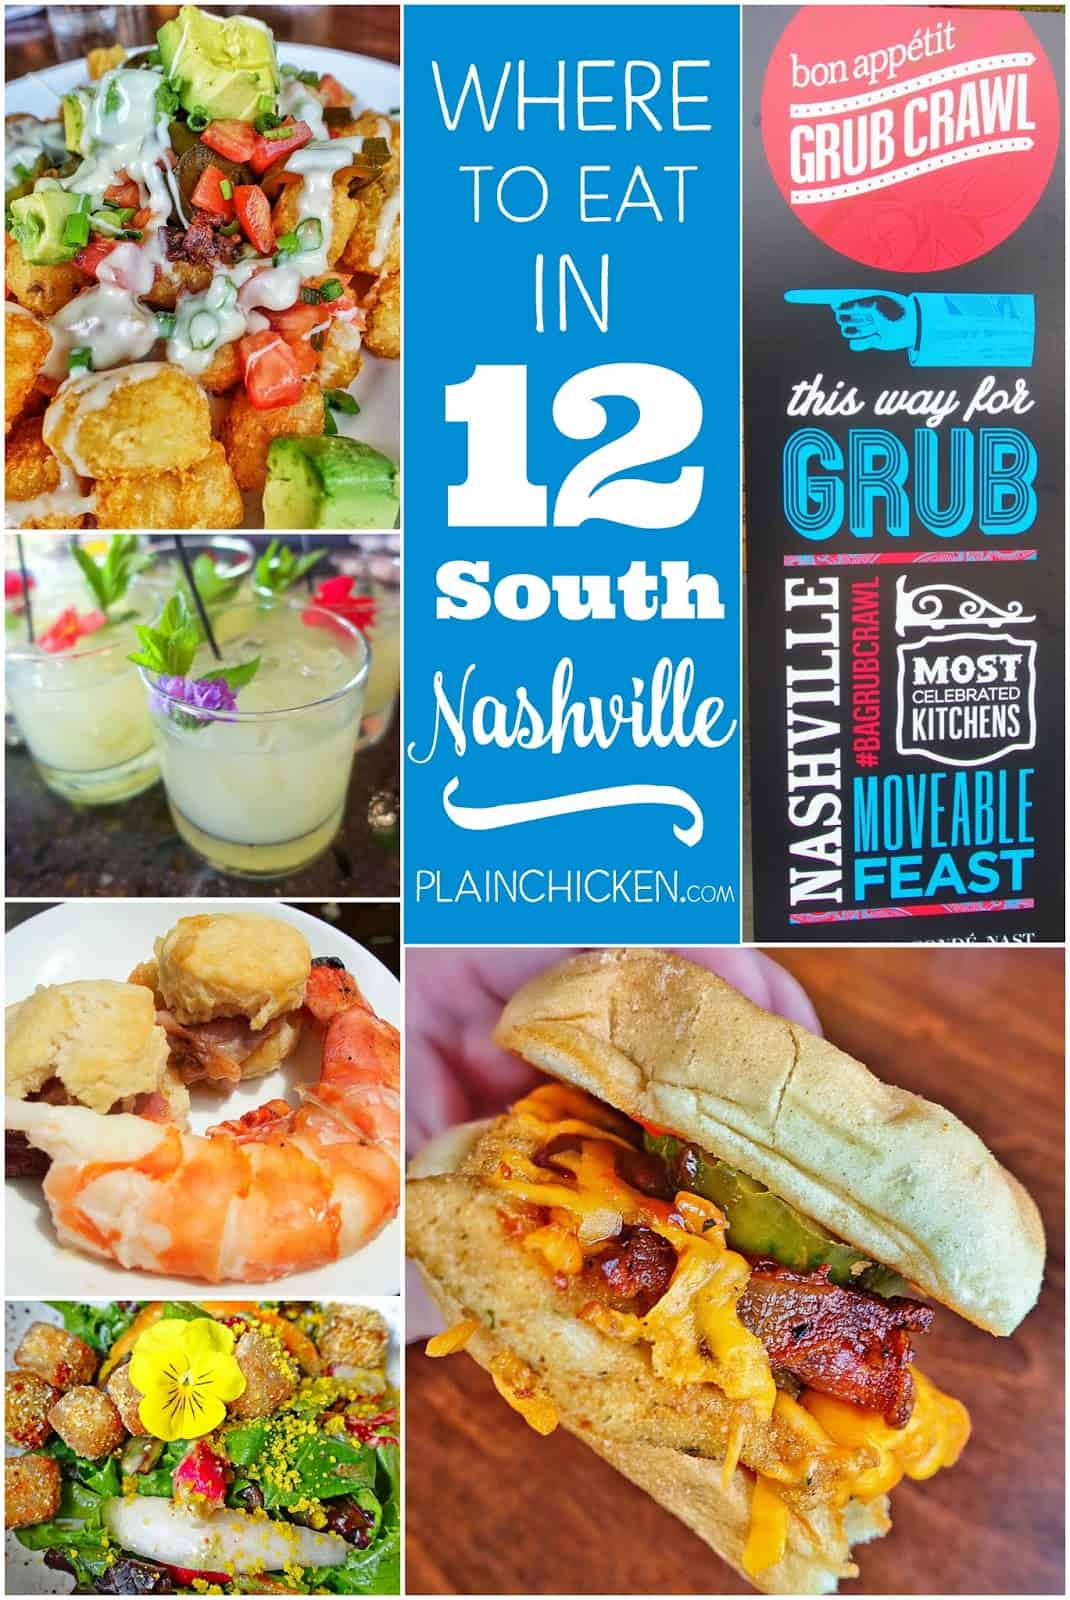 Where to Eat in Nashville, TN - 12 South neighborhood. Nashville's hottest neighborhood! You don't want to miss these places! Urban Grub, Epice, The Flipside and Josephine. SO much great food!